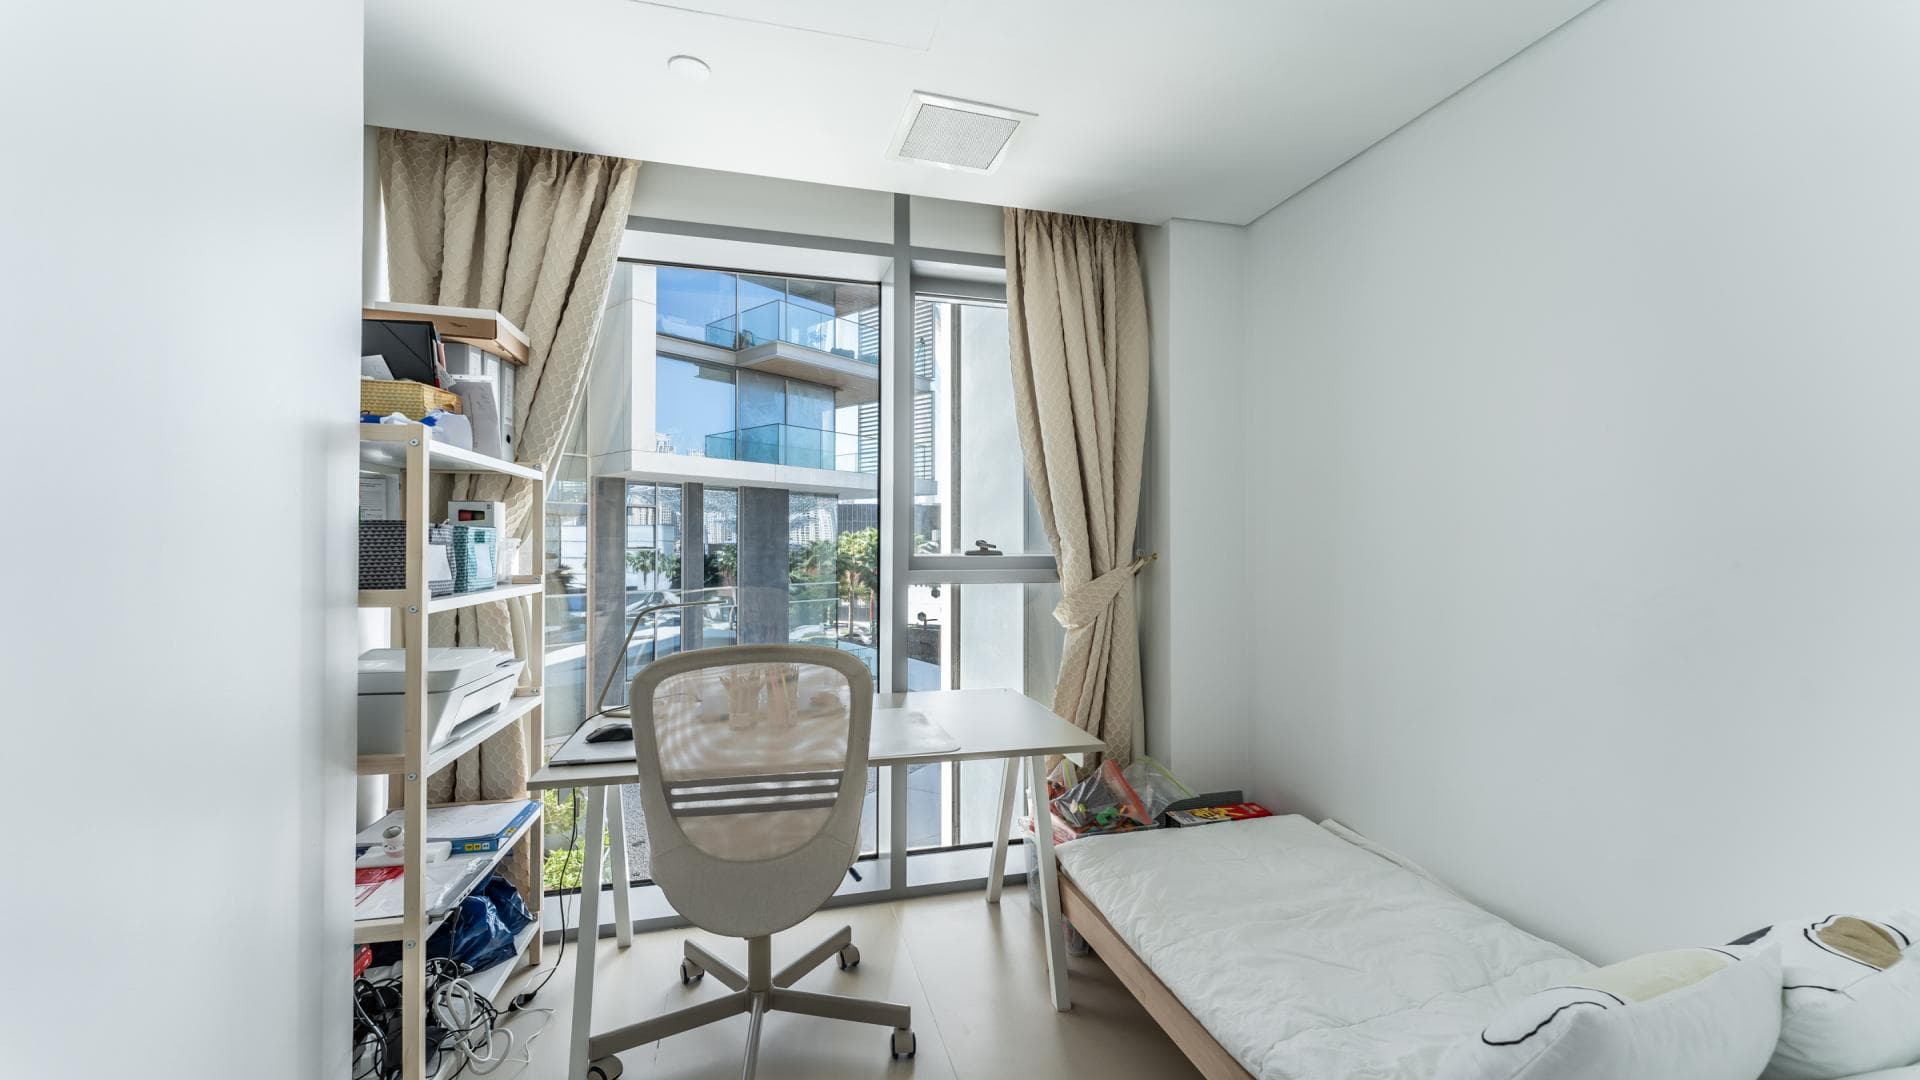 2 Bedroom Apartment For Sale Bluewaters Residences Lp35580 Ba411cab19c9300.jpg